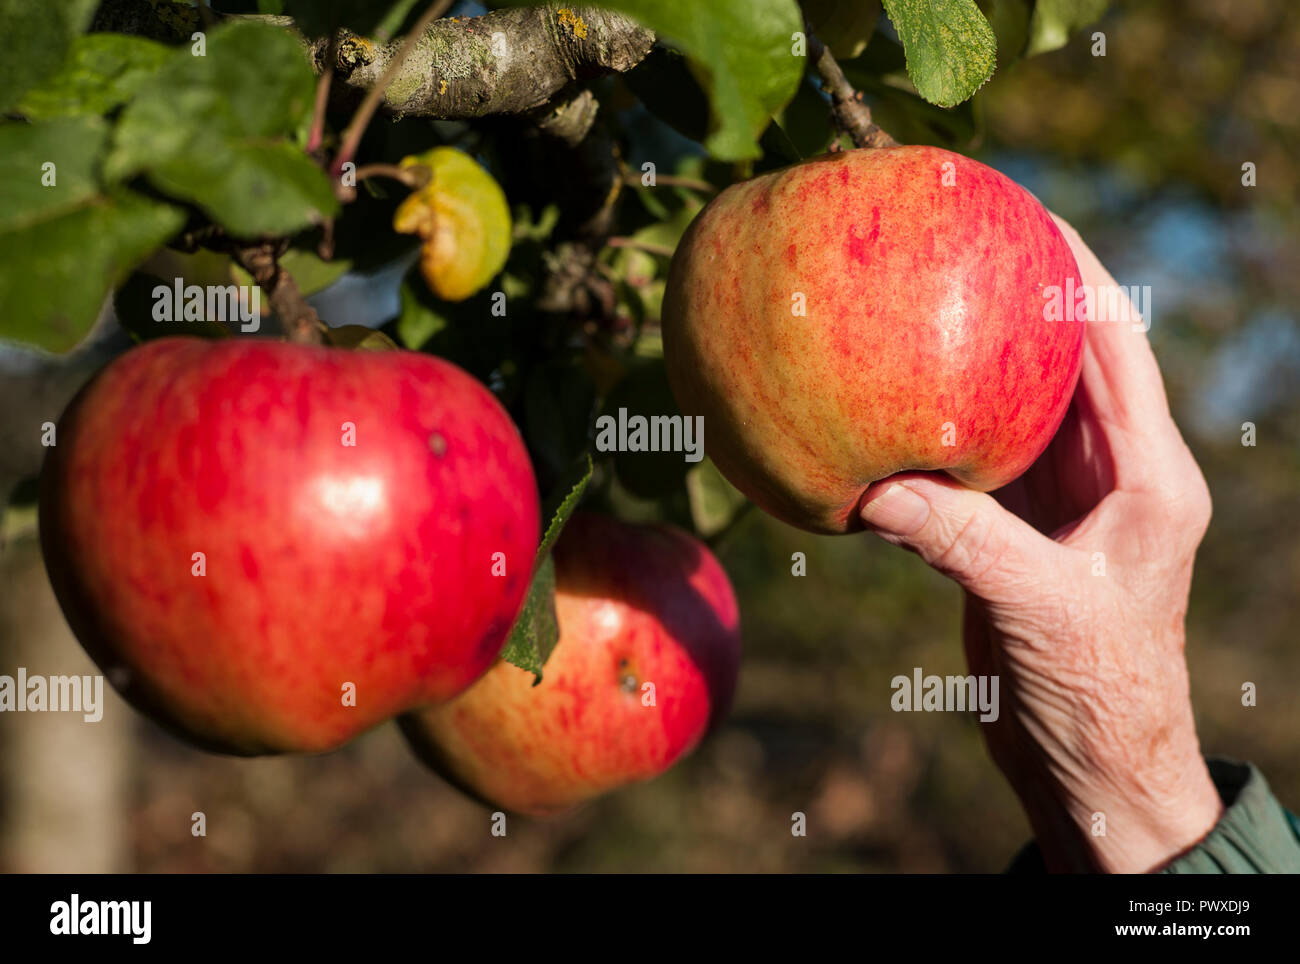 Ripe red dual-purpose apples on a tree (Malus domestica Howgate Wonder) ready for picking in October in Wiltshire England UK Stock Photo